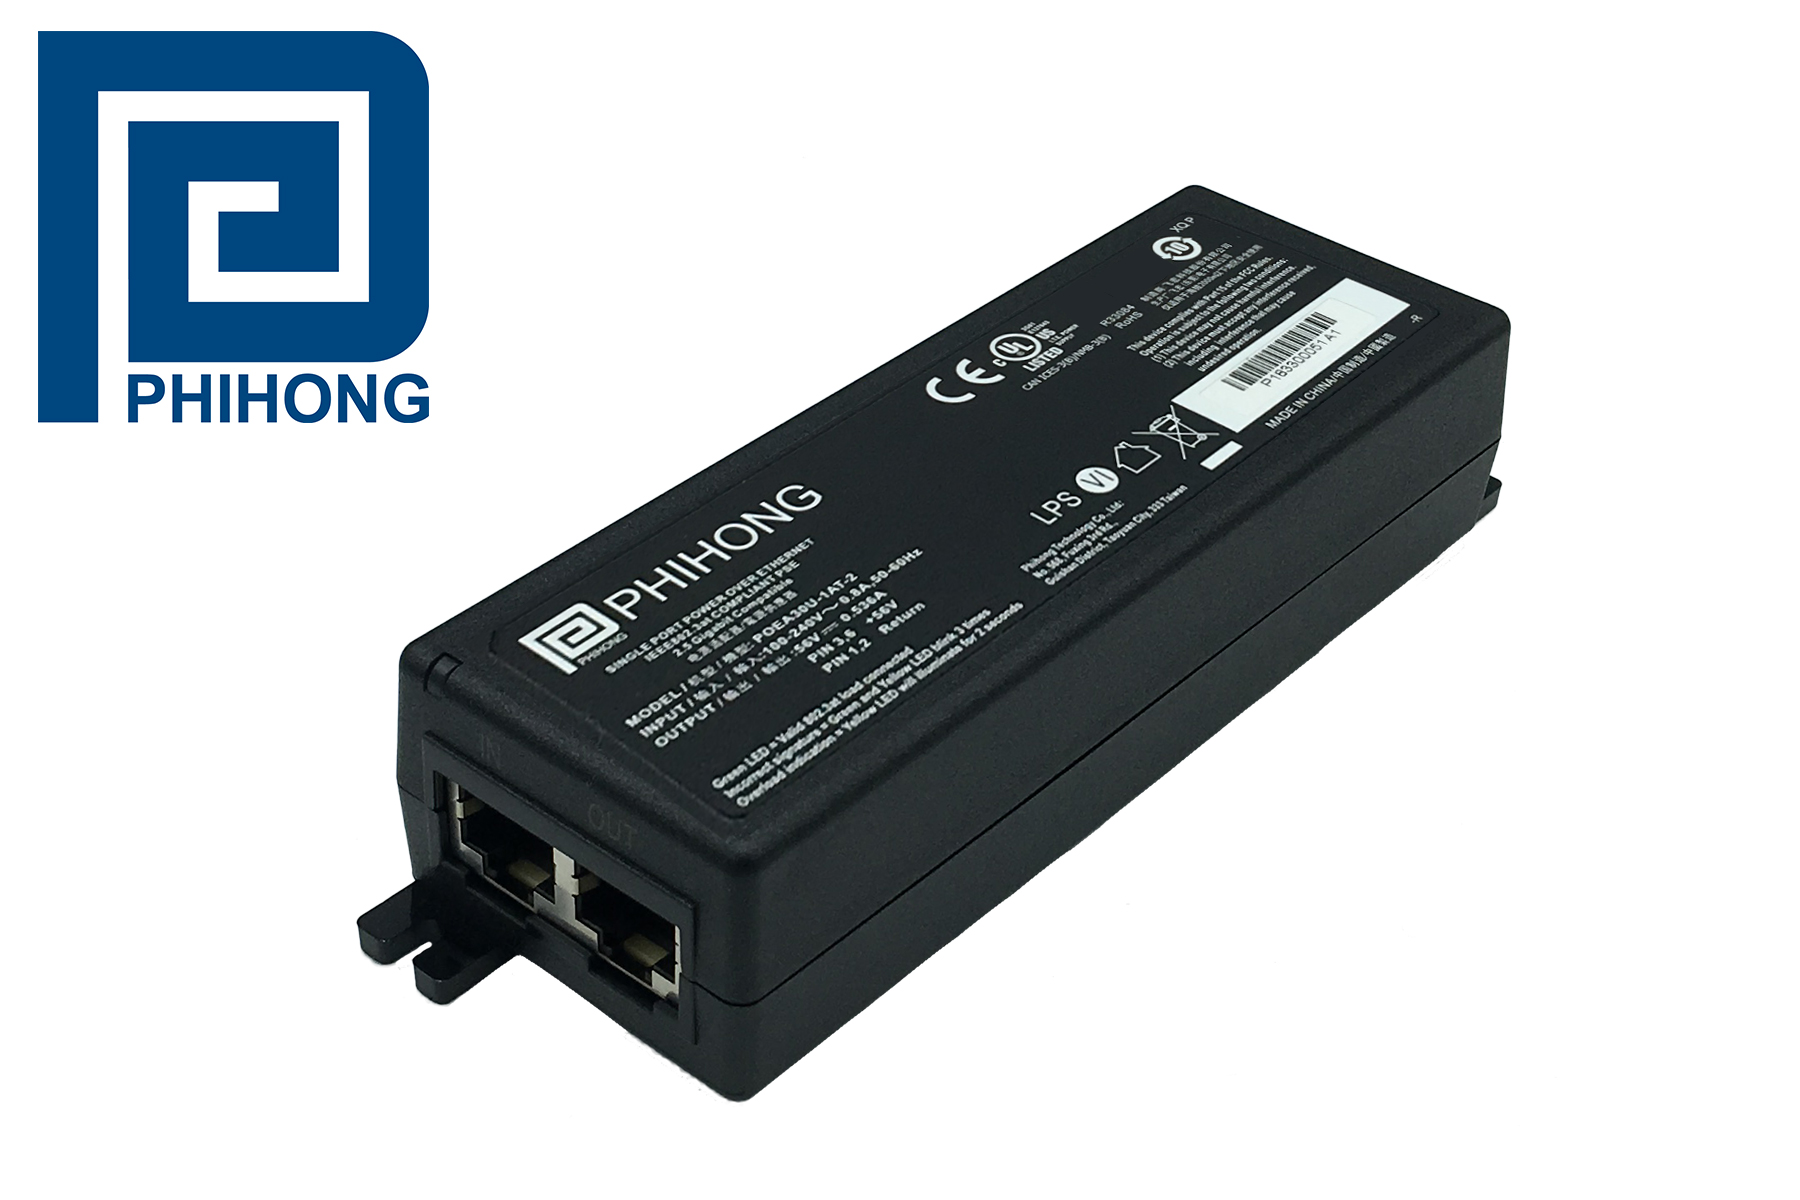 POE Injectors Support 2.5G, 5G and 10G Transmission Rates